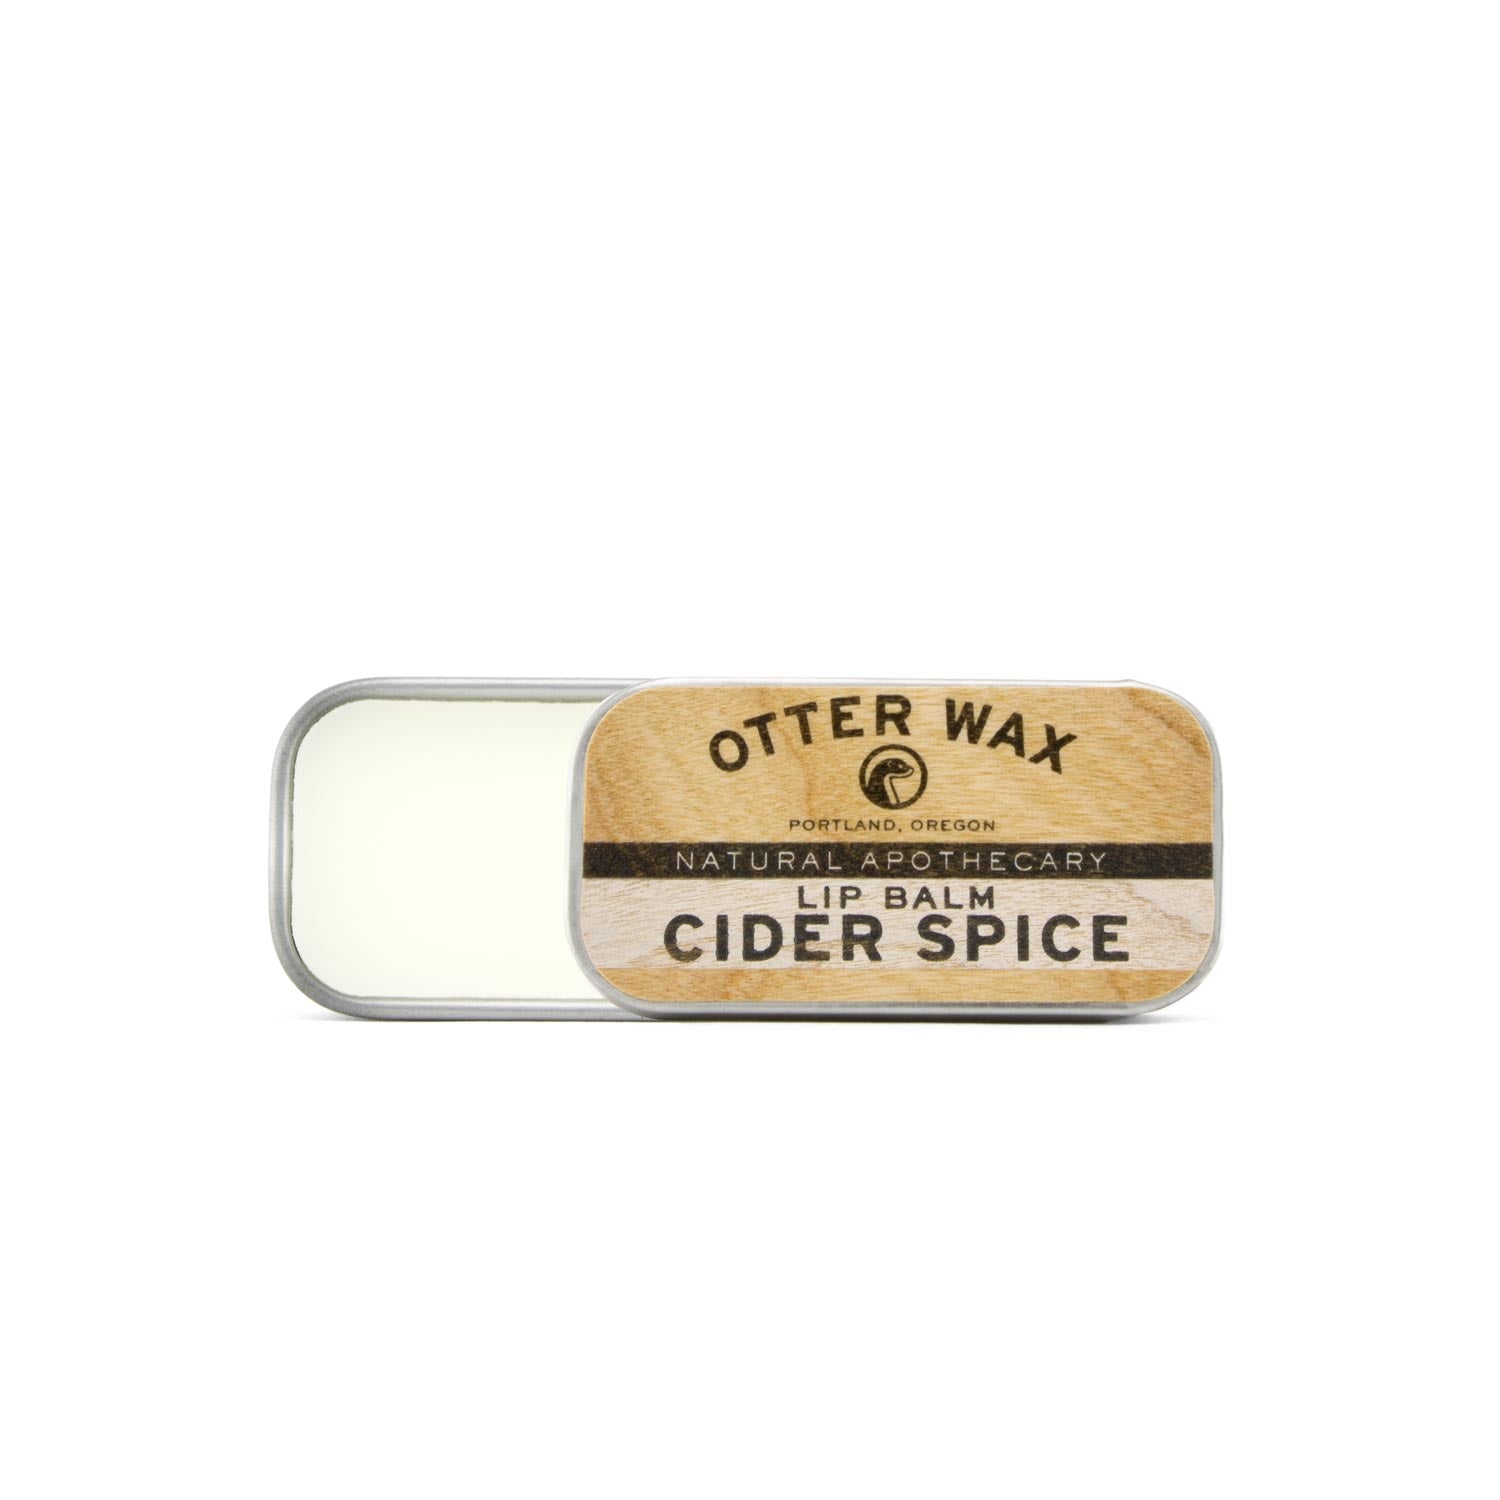 Otter Wax All Natural Cider Spice Moisturizing Lip Balm Treatment With Beeswax Shea Butter And Essential Oils To Nourish Hydrate And Heal Dry Cracked Lips